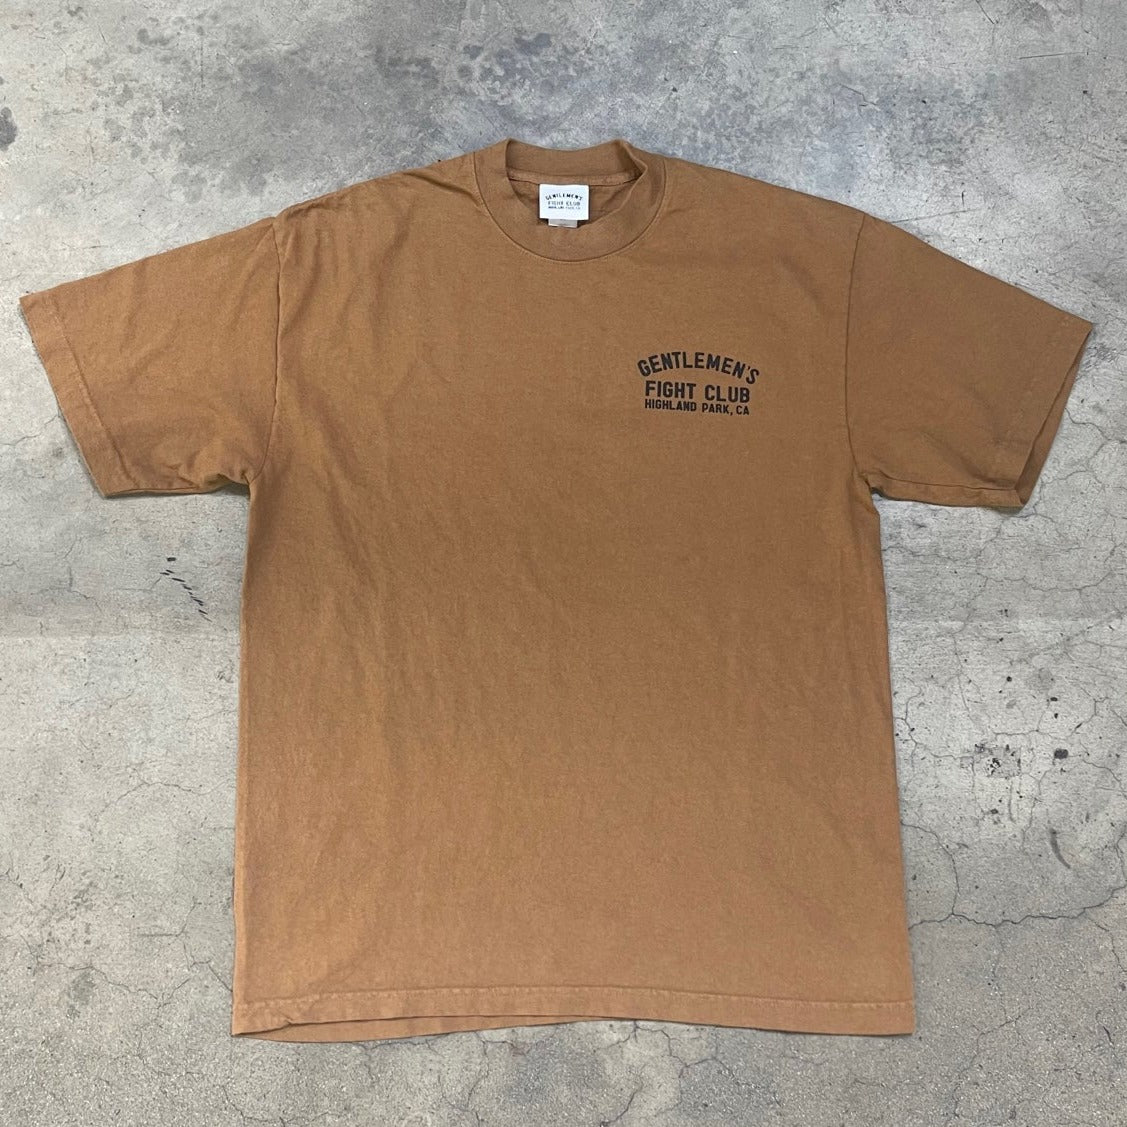 Front of whiskey brown tee with black print that reads "Gentlemen's Fight Club Highland Park, CA"